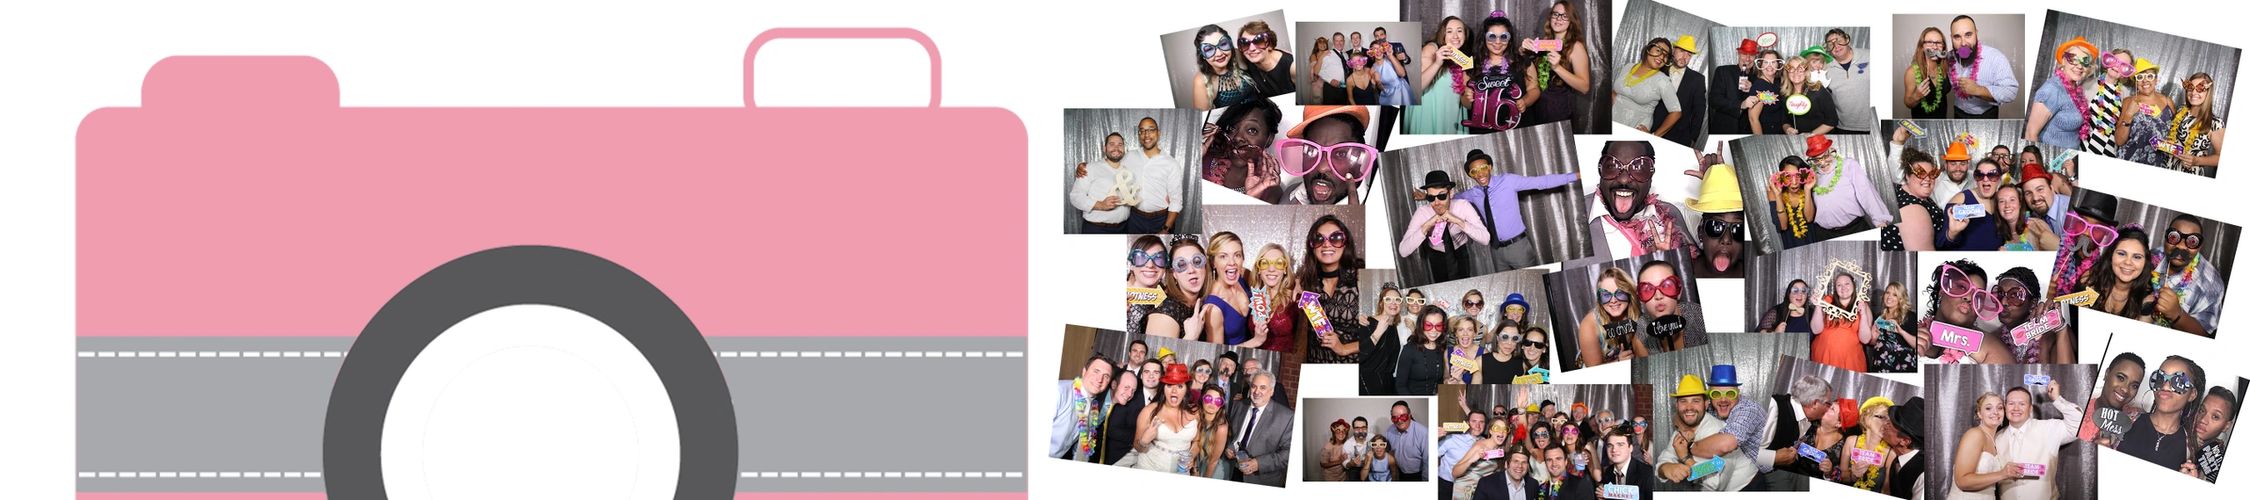 STL St. Louis photo booth rental weddings parties events fun private celebrate